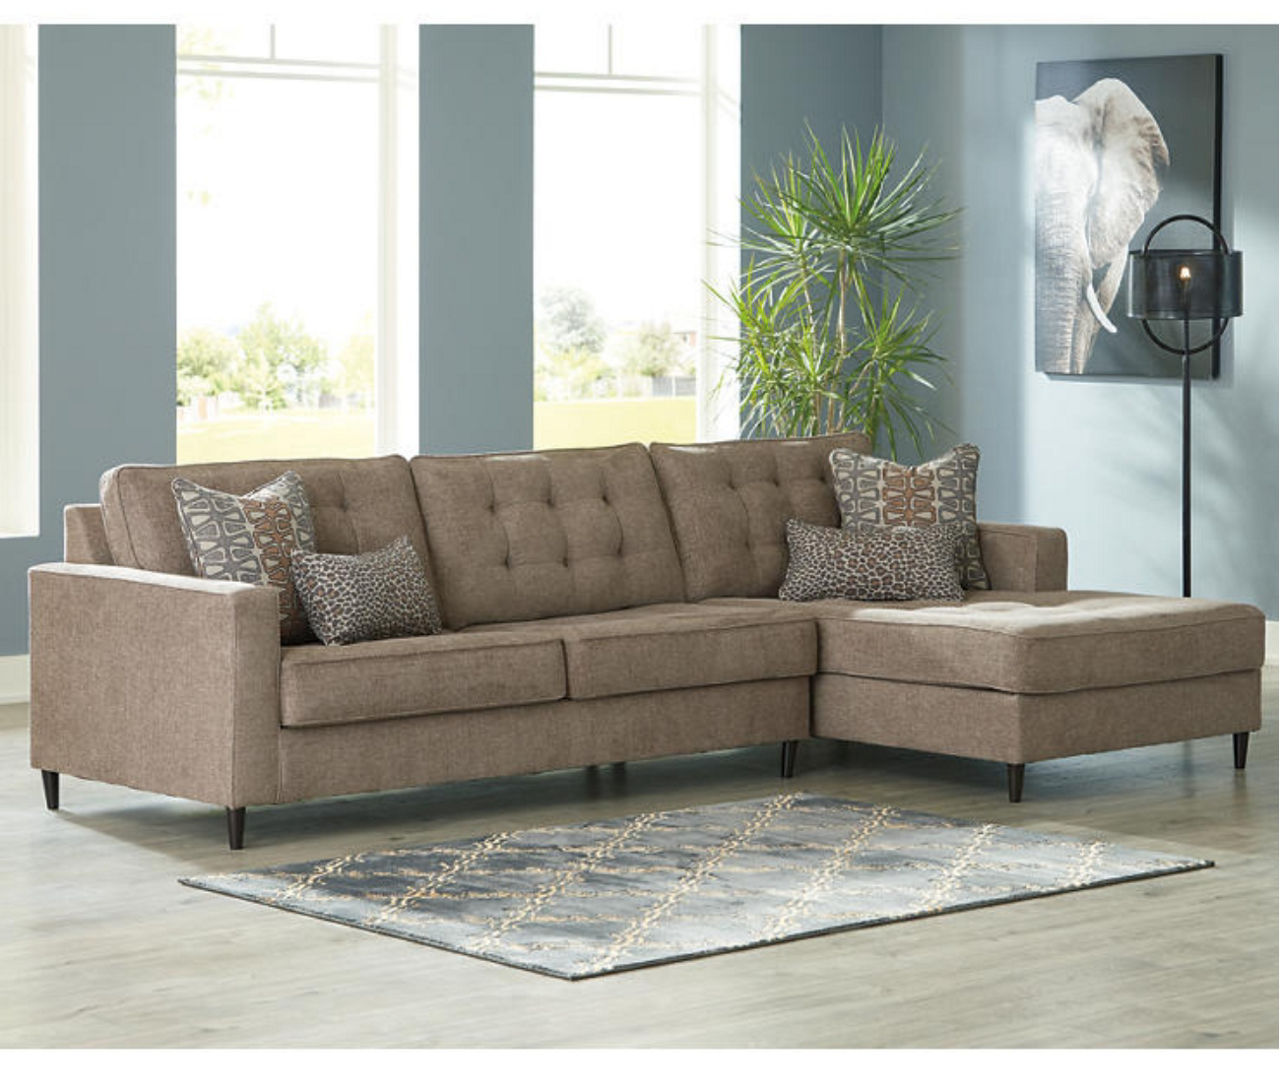 Signature Design By Ashley Flintshire Sectional with Right-Arm-Facing Chaise